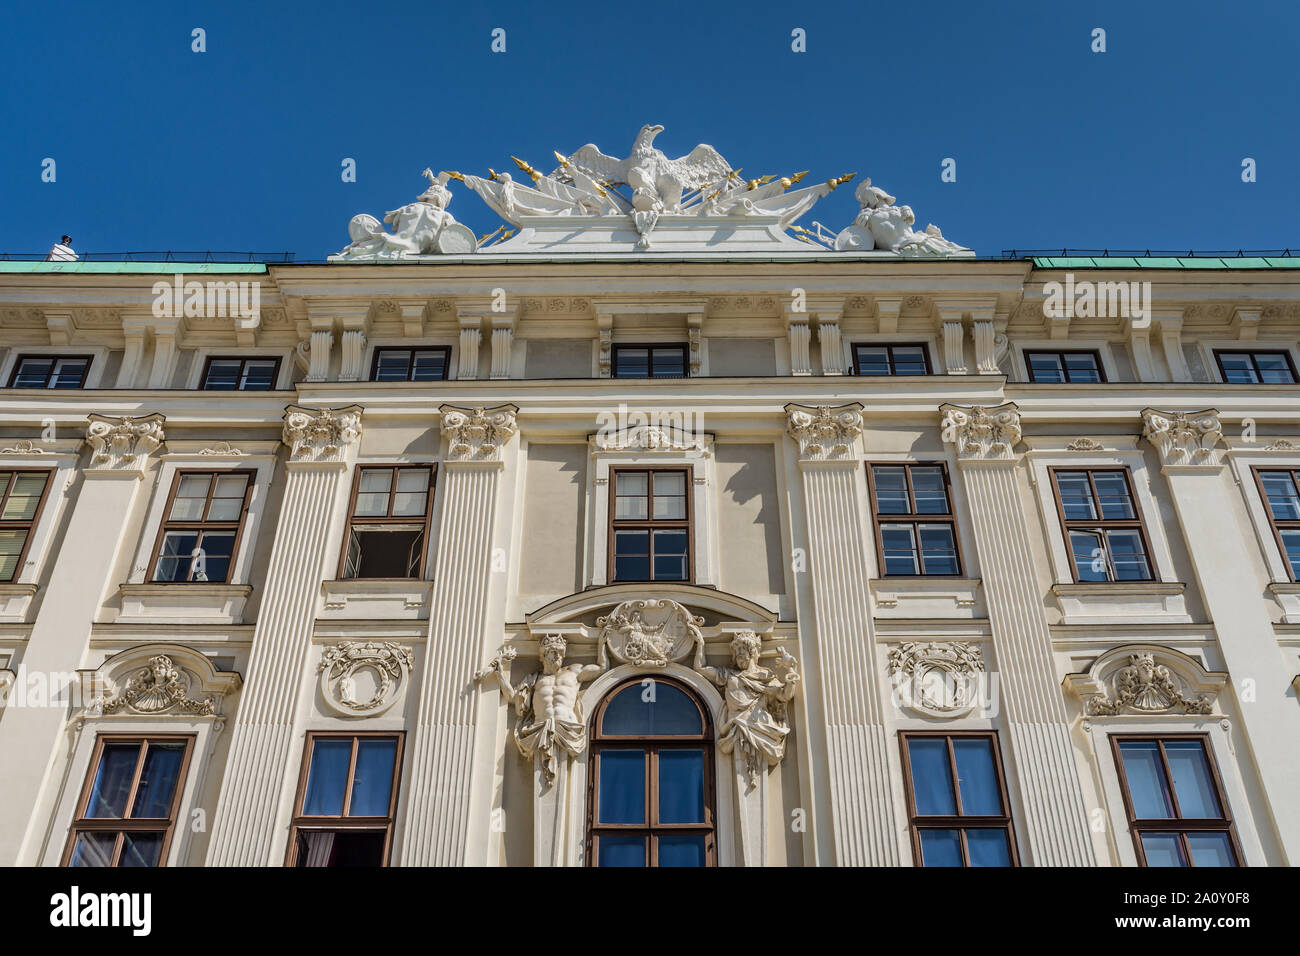 Ornate architecture in the inner courtyard of the Hofburg Palace, Vienna, Austria. Stock Photo